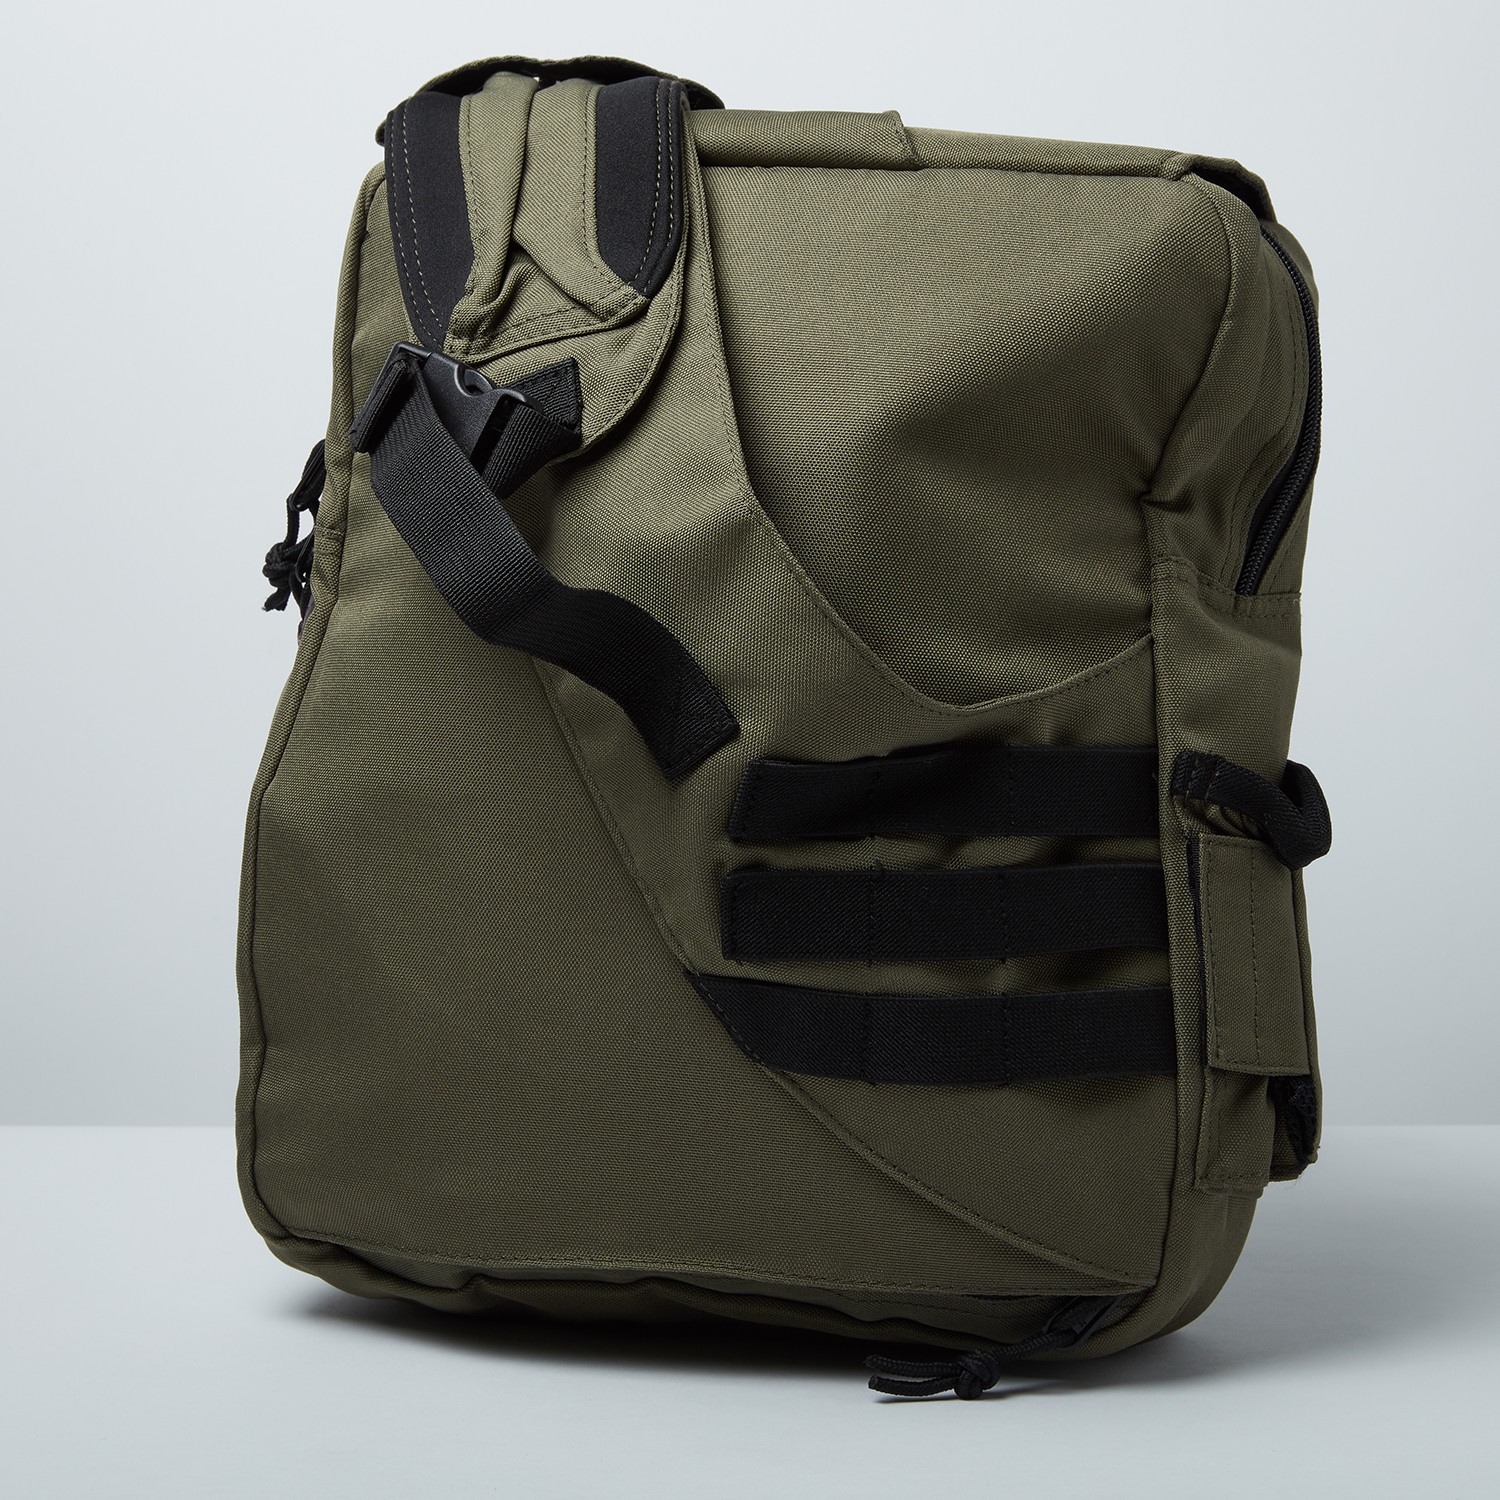 Man-PACK Classic 2.0 // Olive // Right Shoulder (No Add-on) - Manpack ...